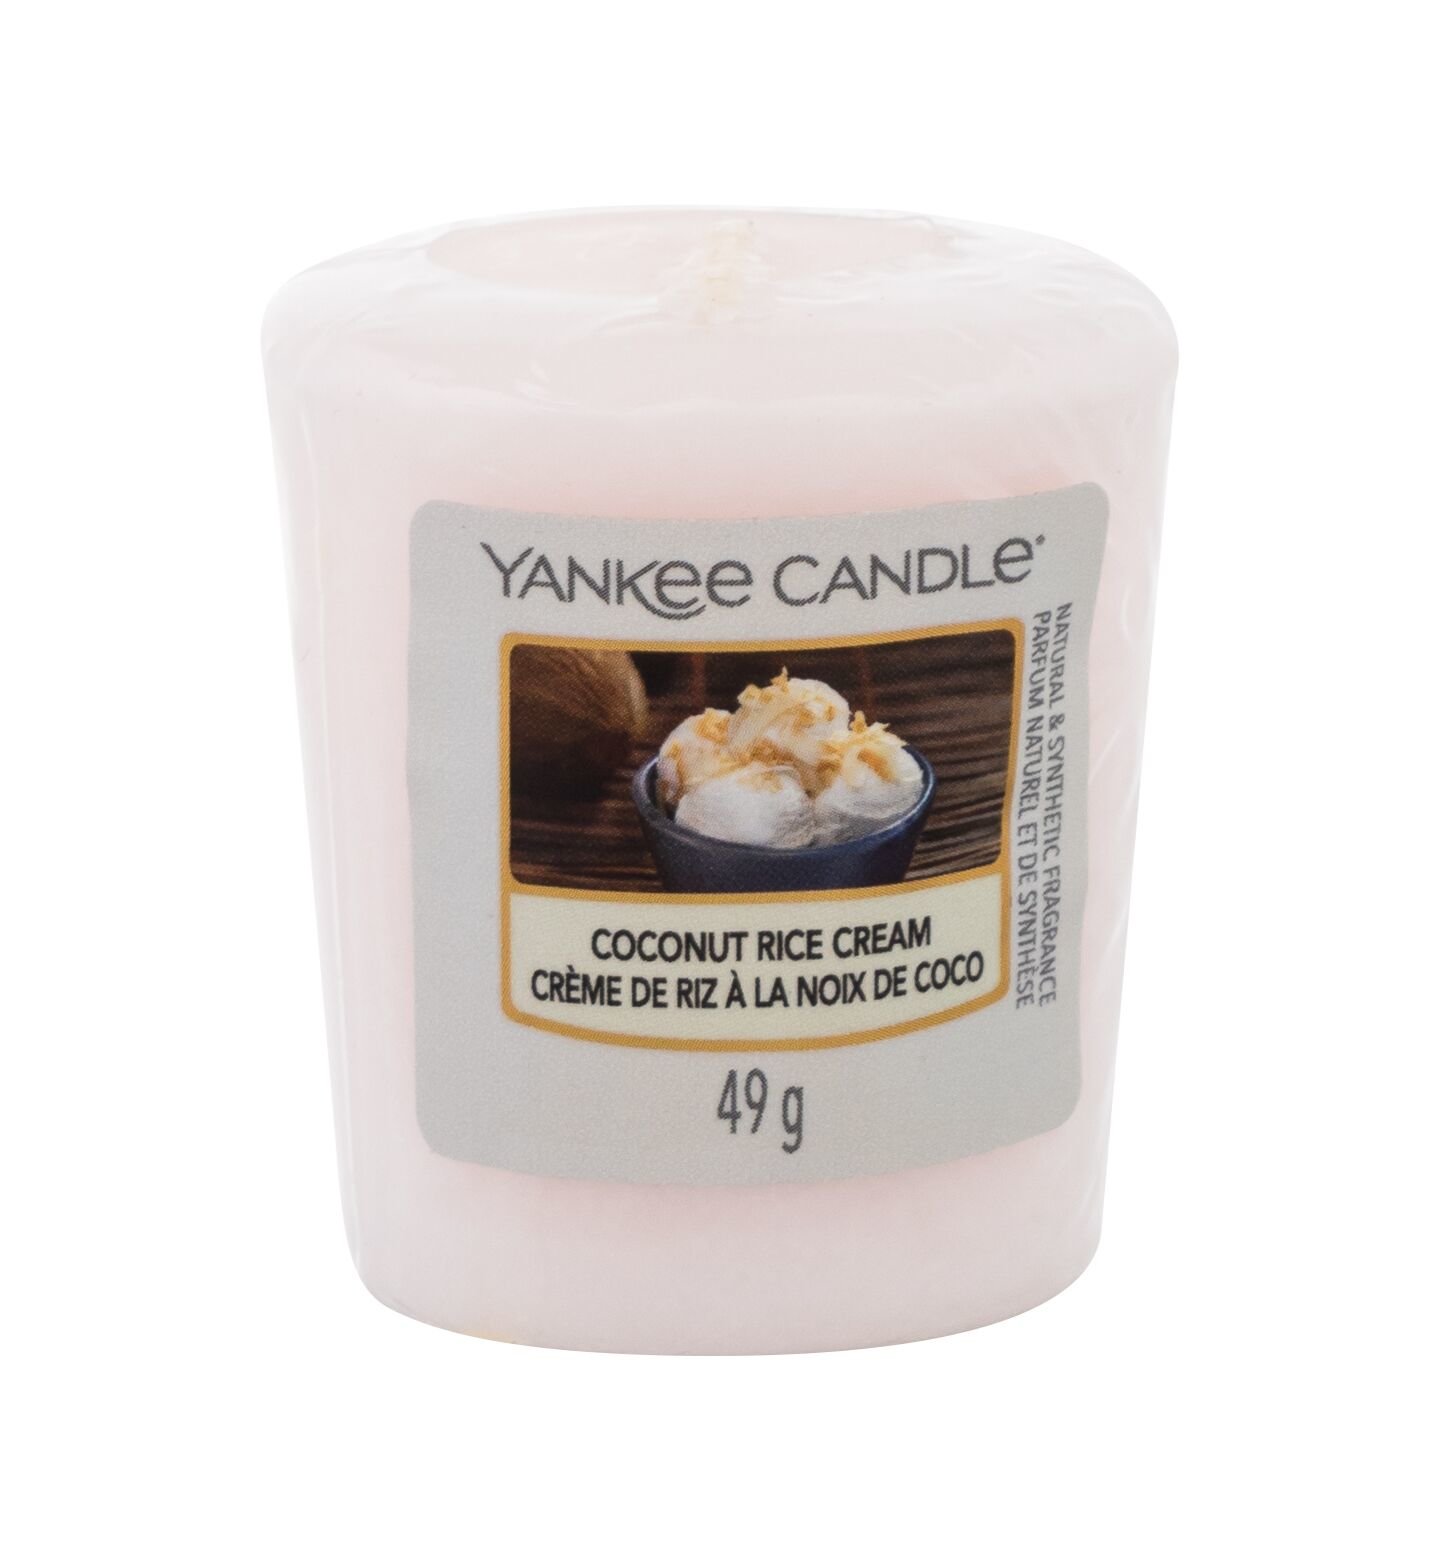 Yankee Candle Coconut Rice Cream 49g Kvepalai Unisex Scented Candle